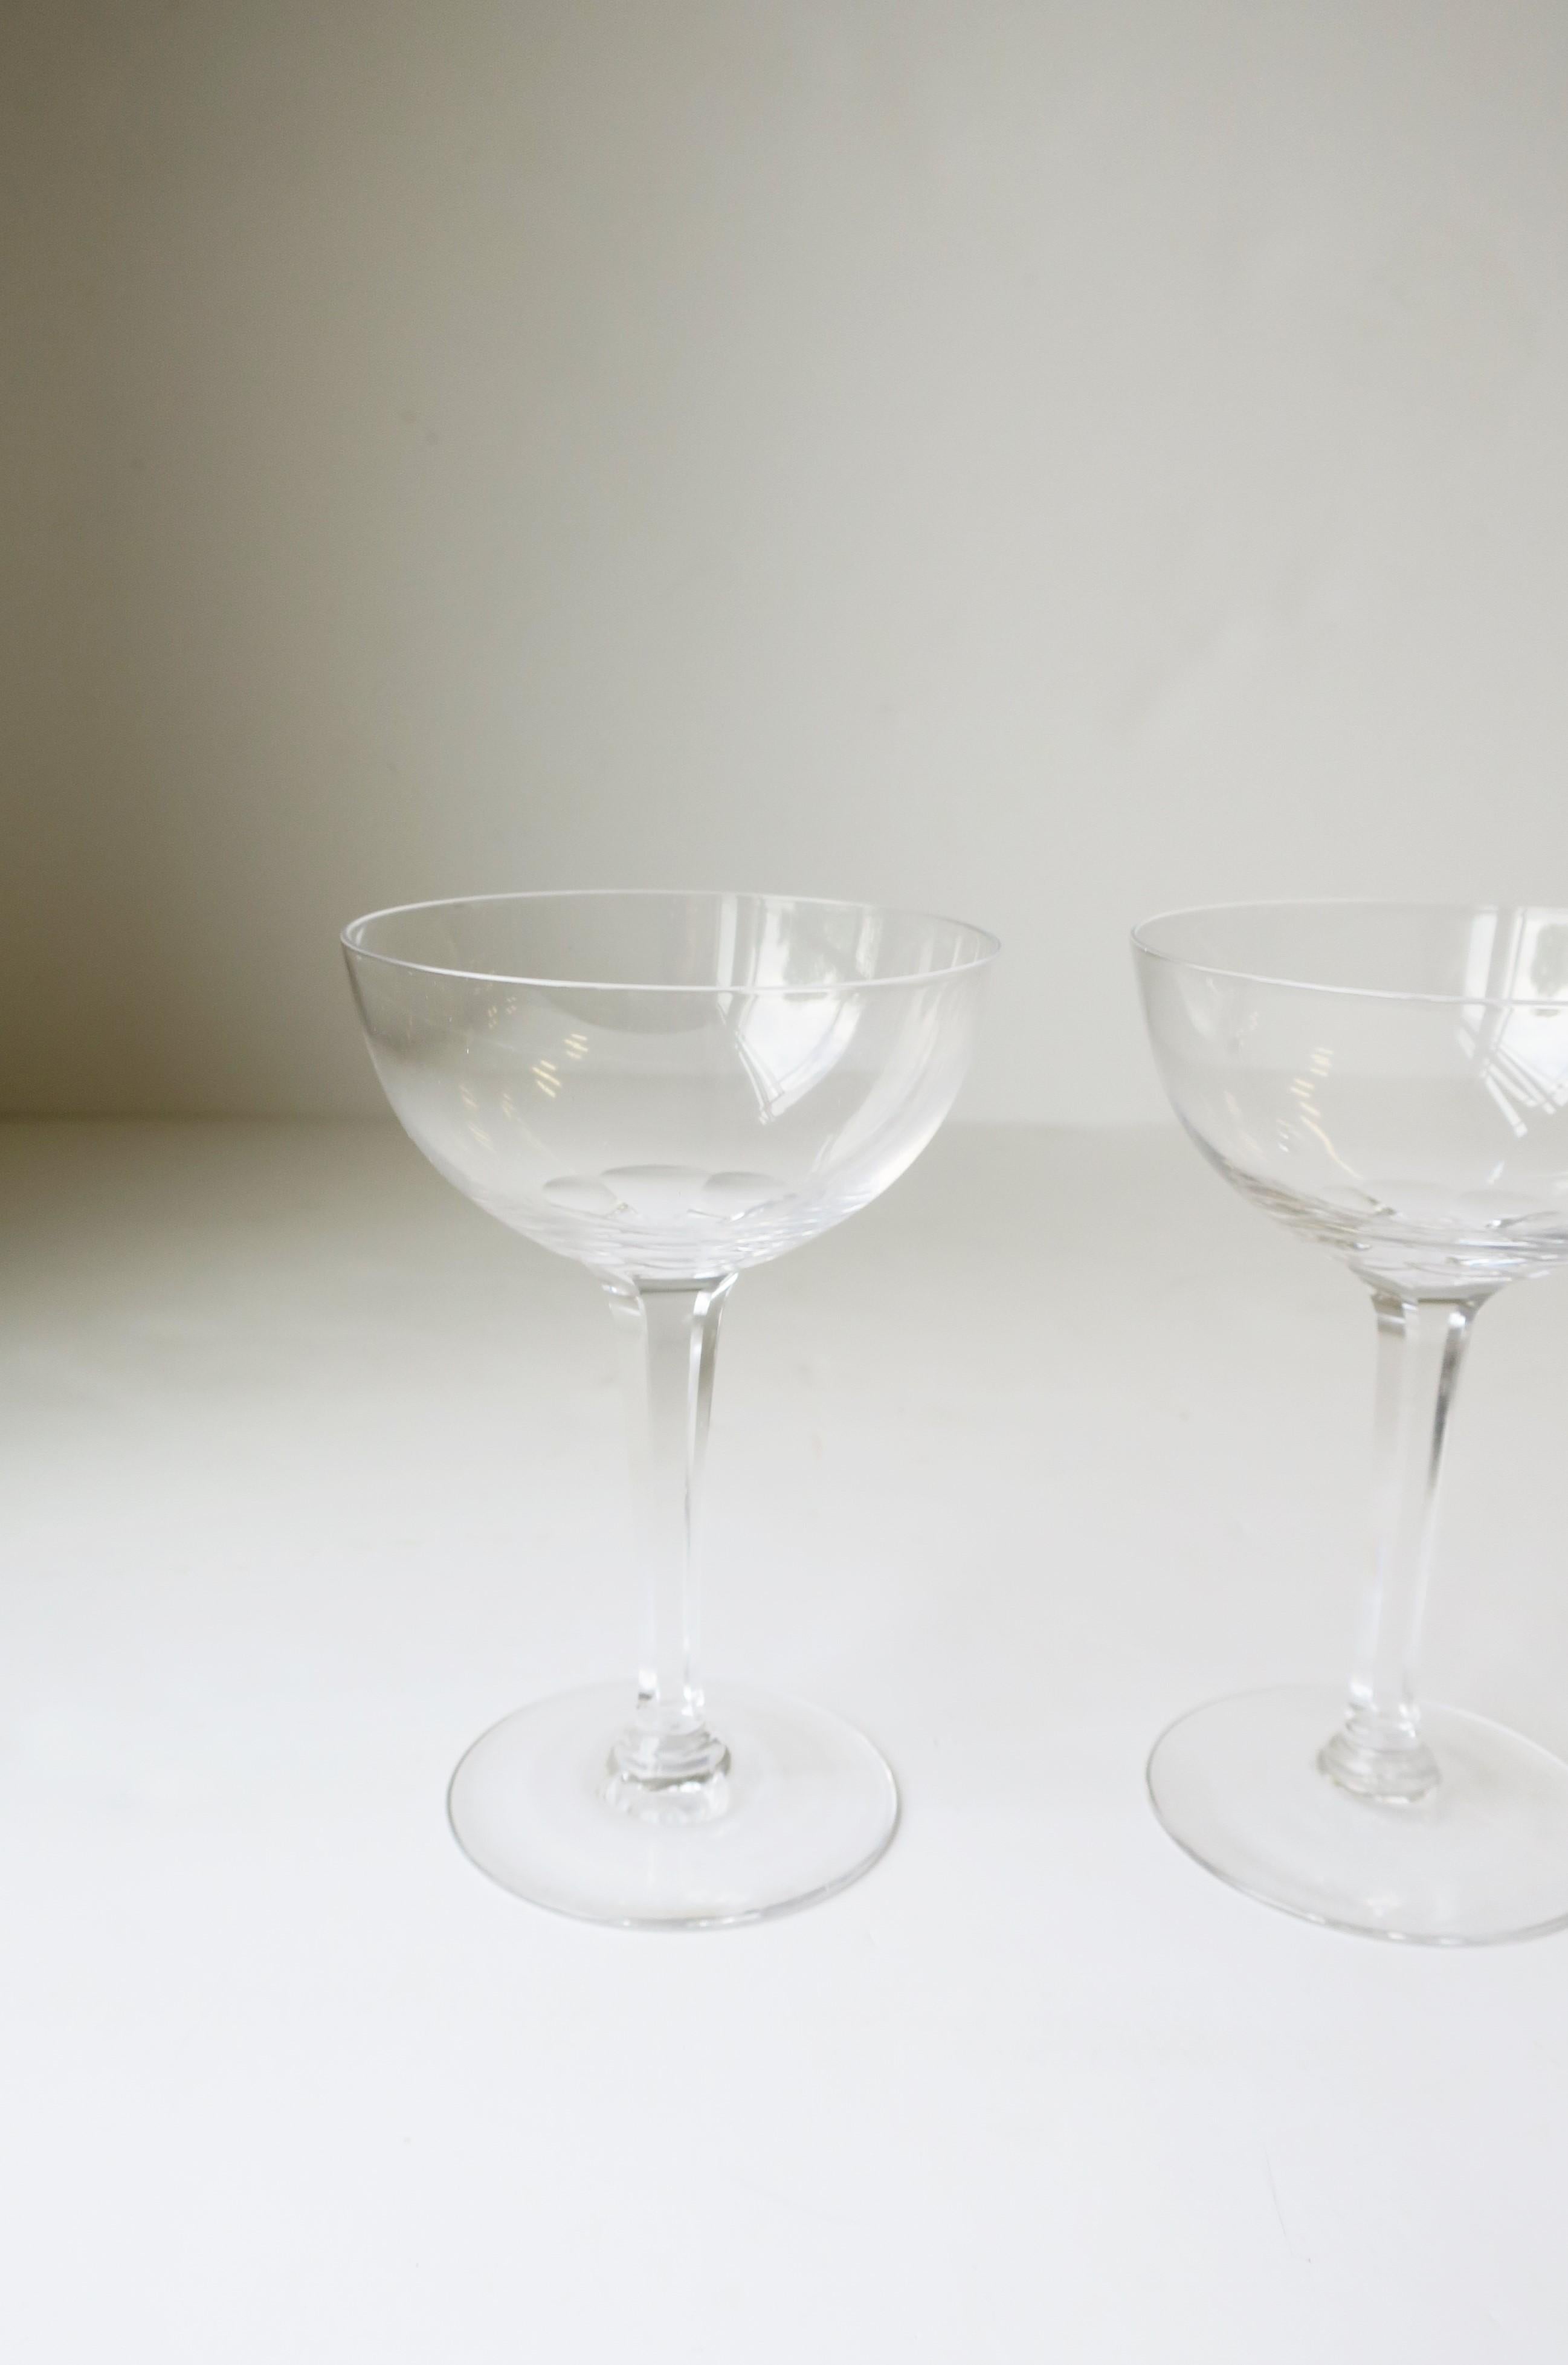 Mid-Century Modern Scandinavian Modern Cocktail, Martini or Champagne Coupe Glasses by Kosta Boda